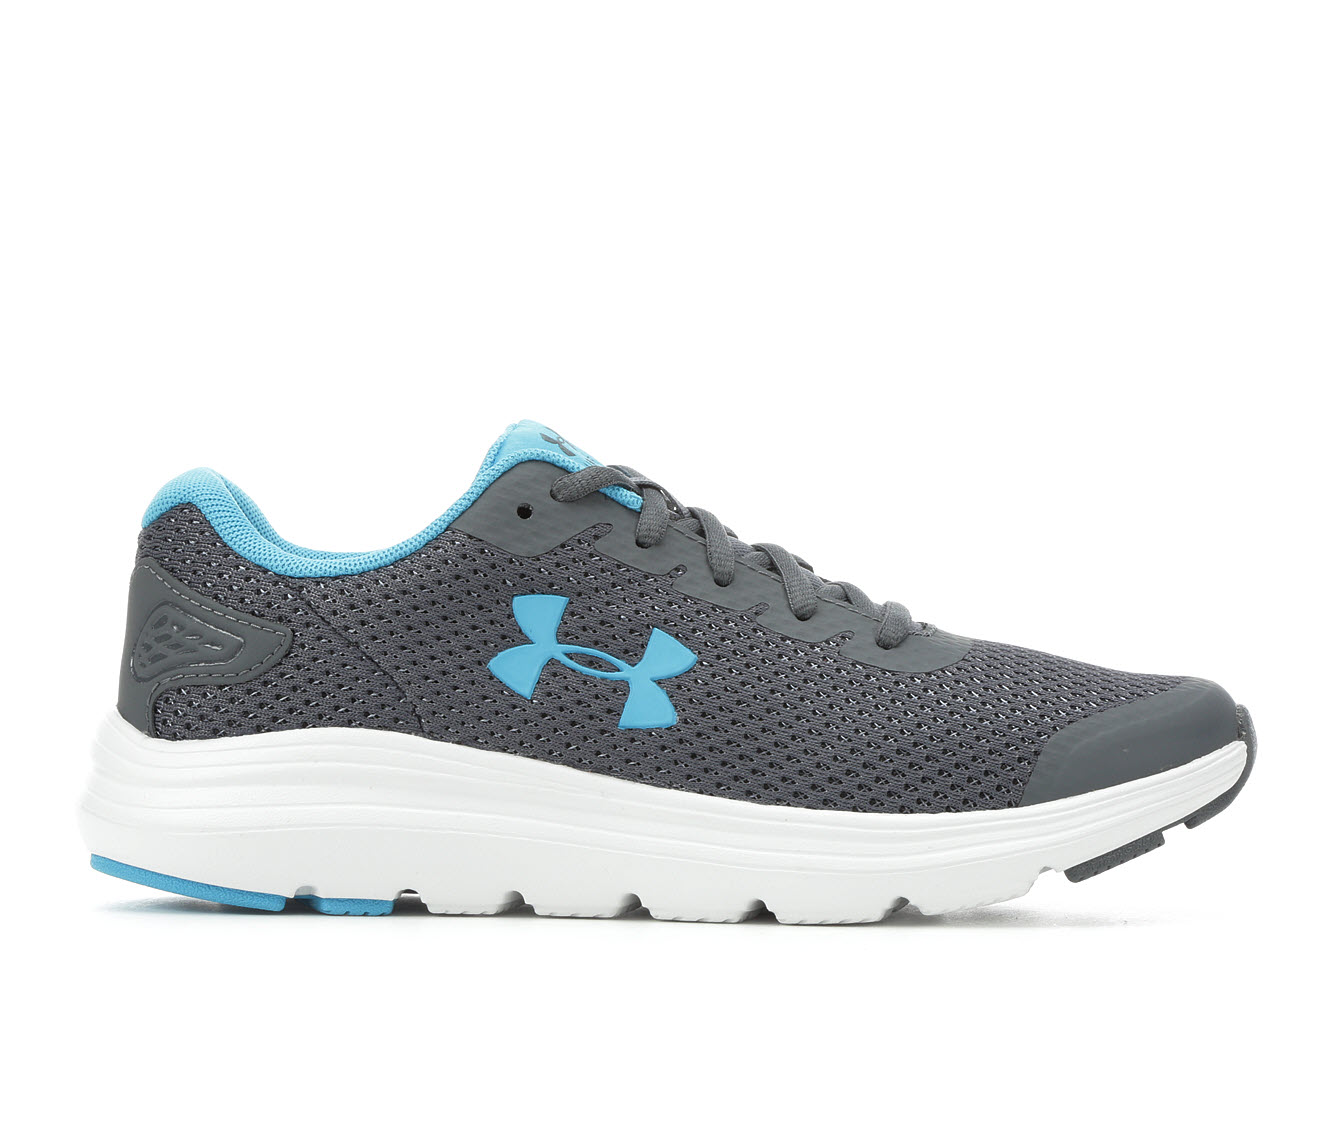 Under Armour Surge Running Shoe Online Shop, UP TO 53% OFF